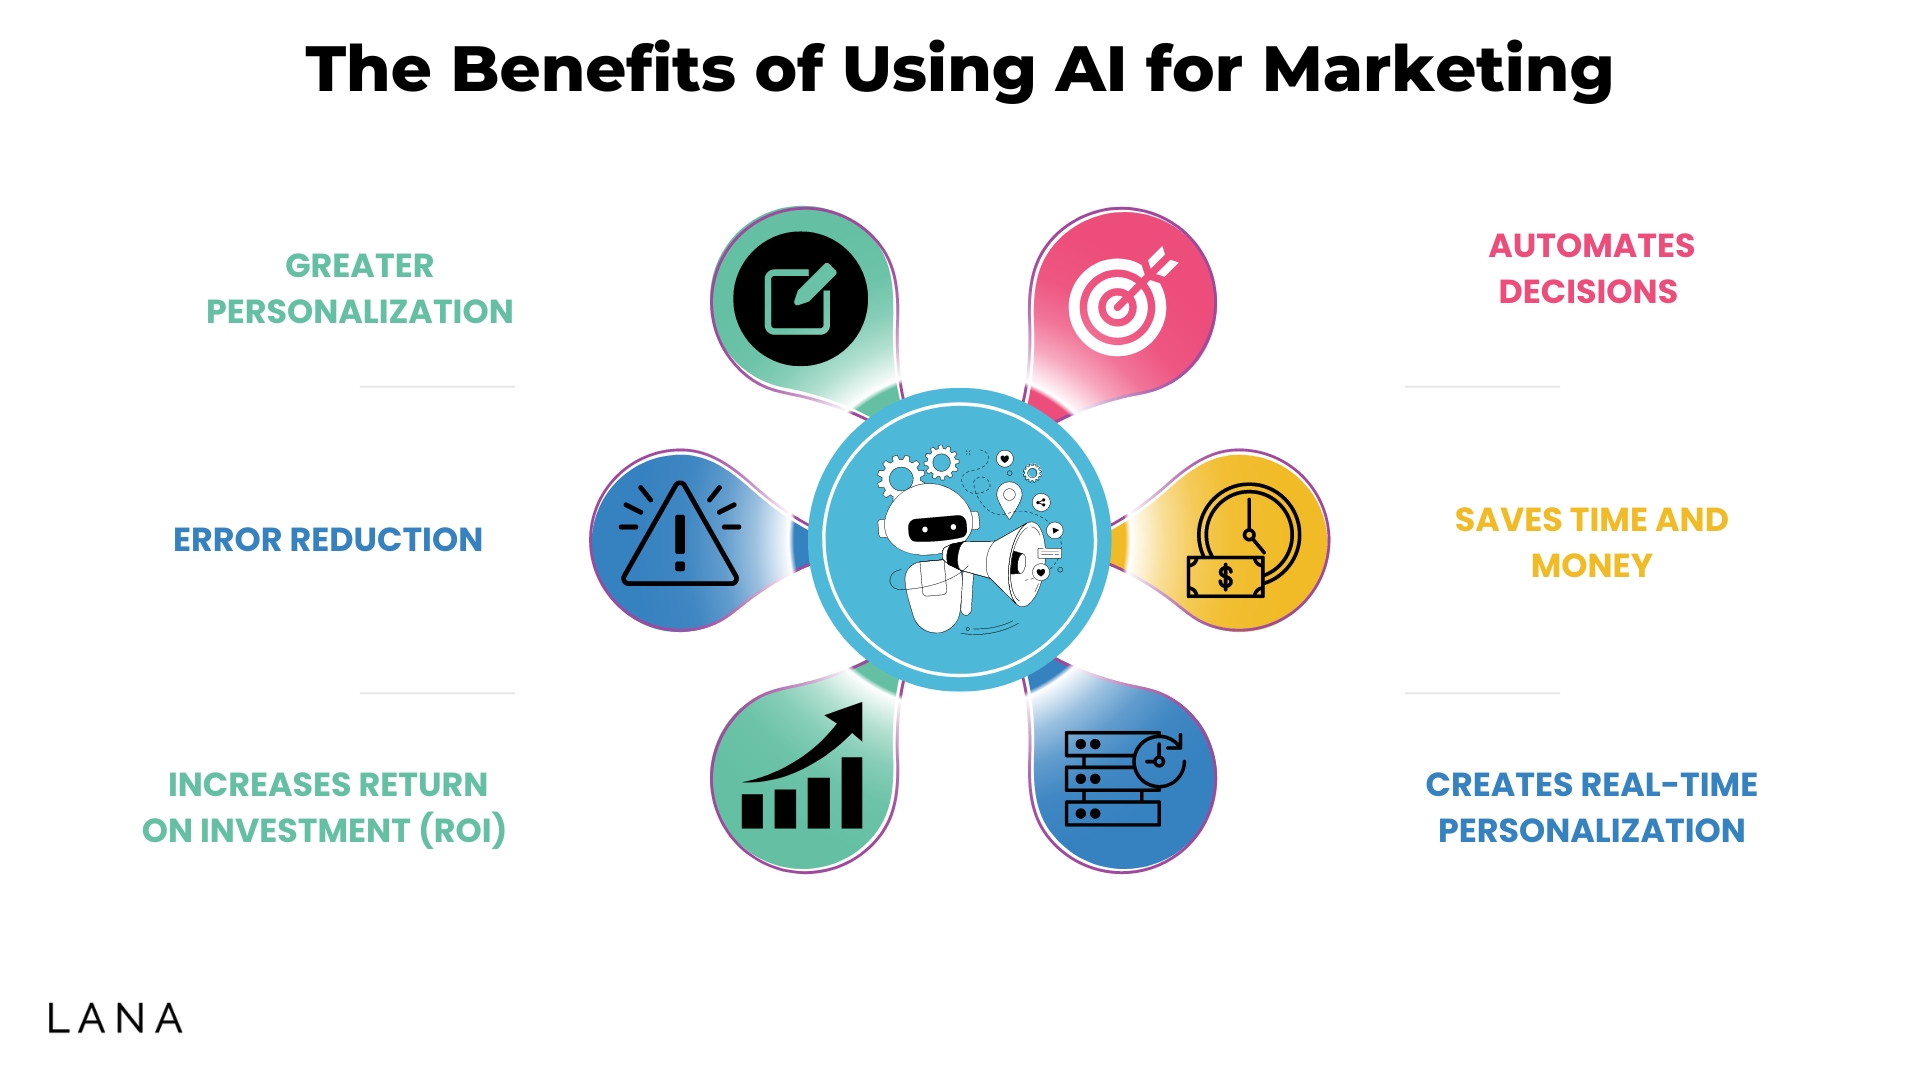 The Benefits of Using AI for Marketing